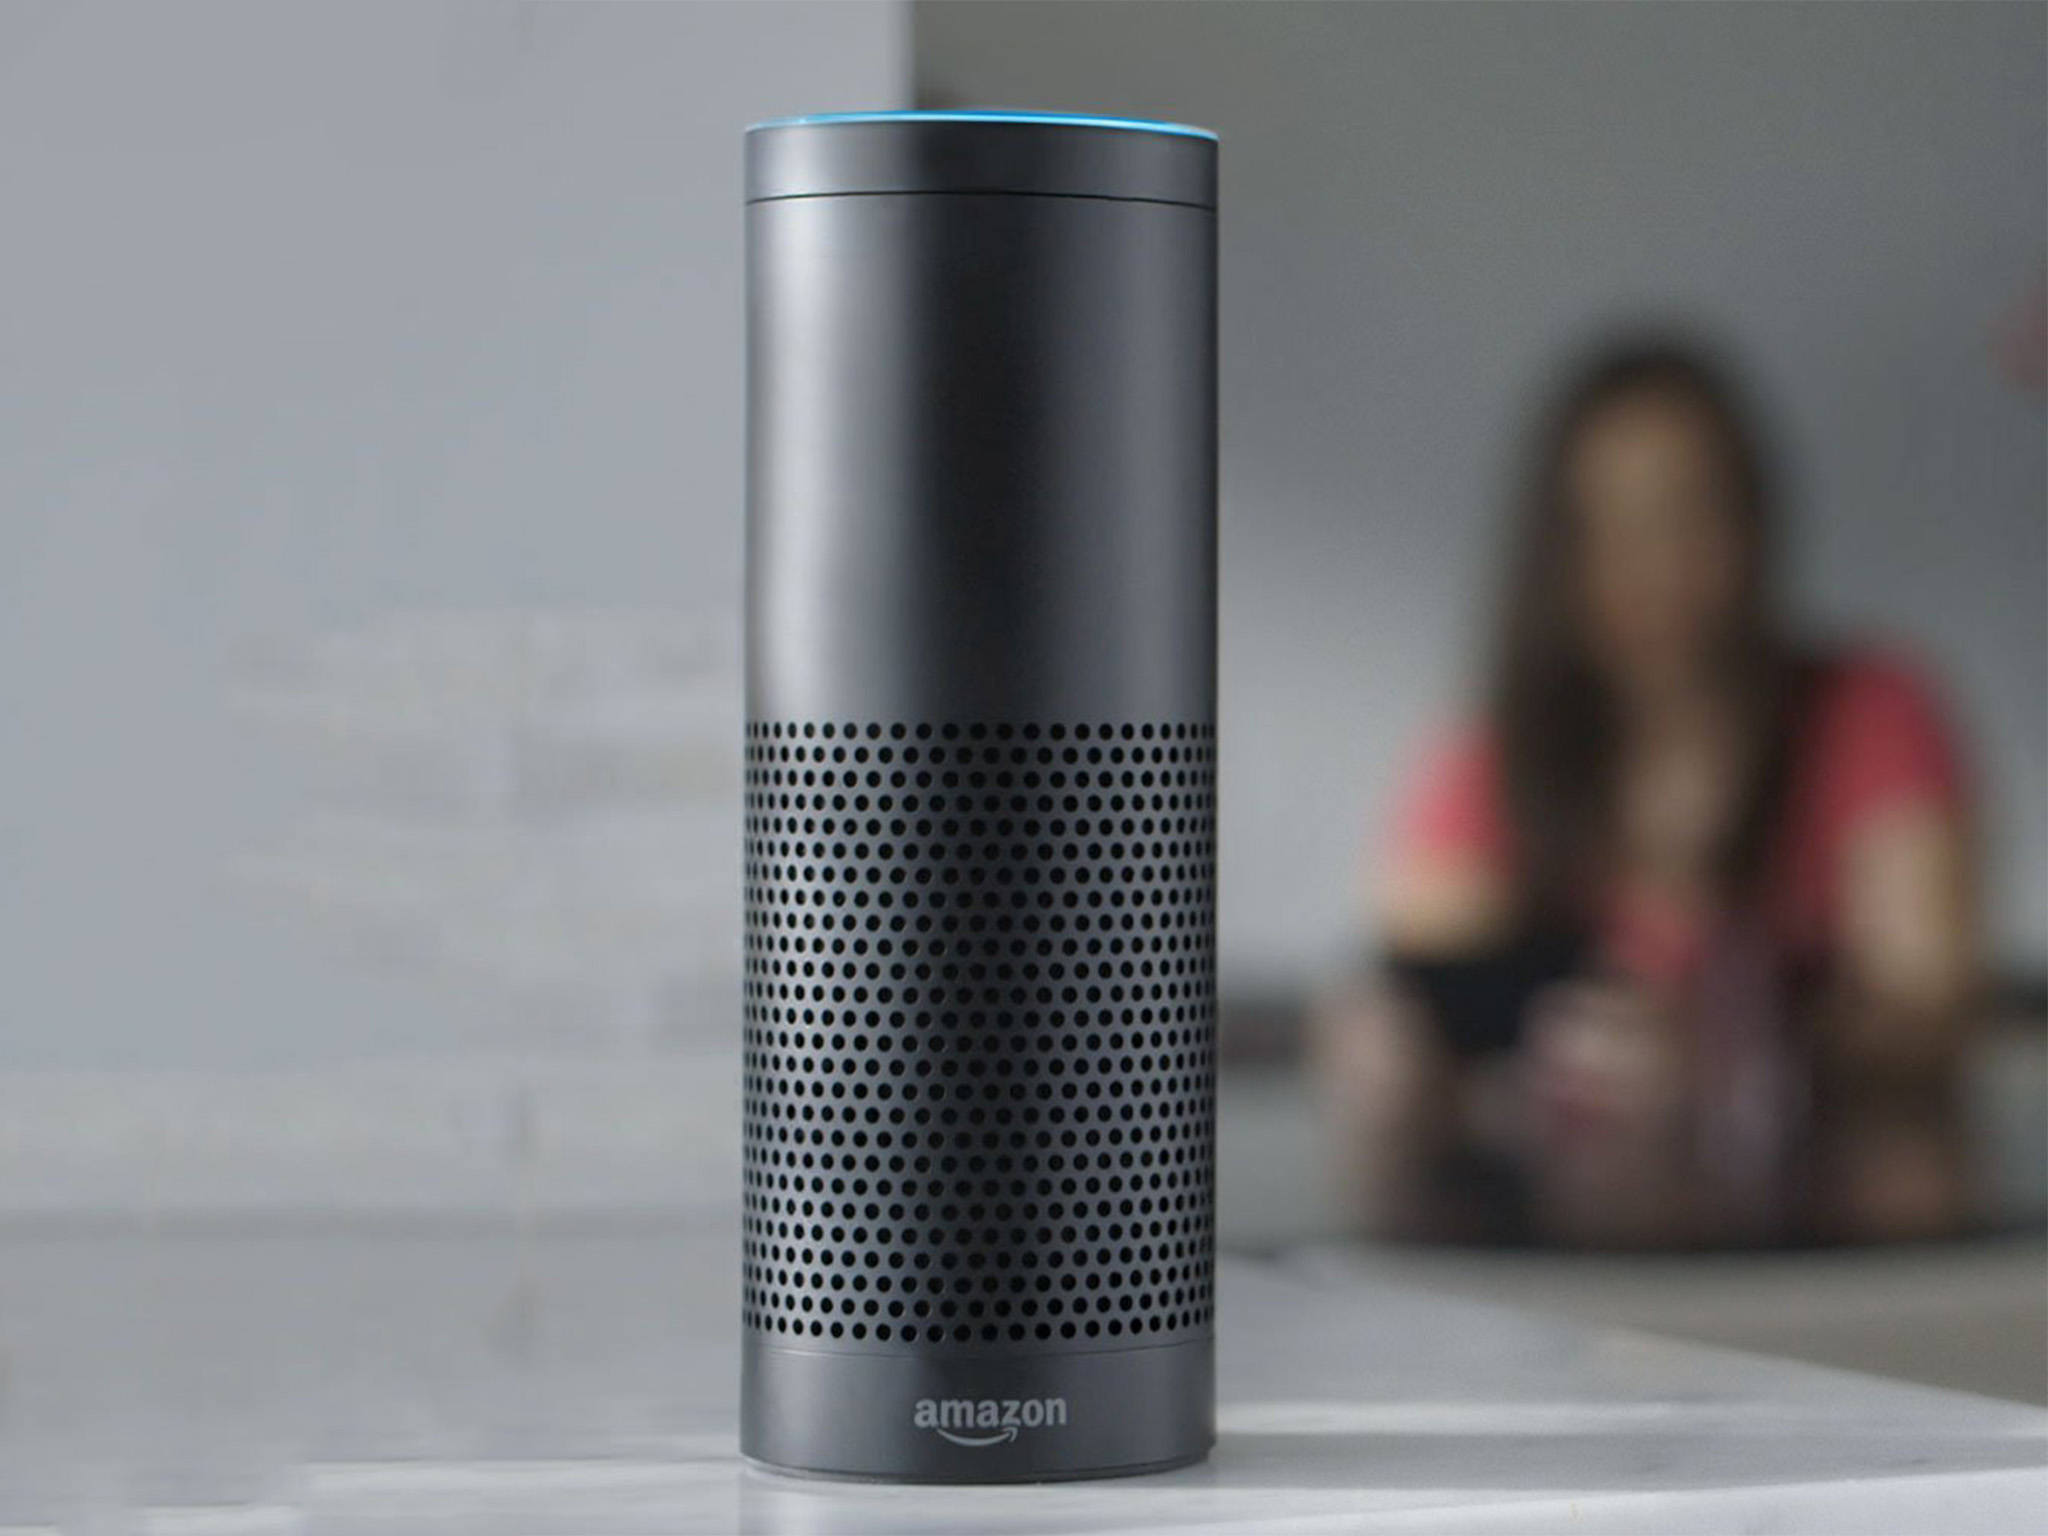 An Amazon Echo is shown sitting on a table. A person sits nearby.